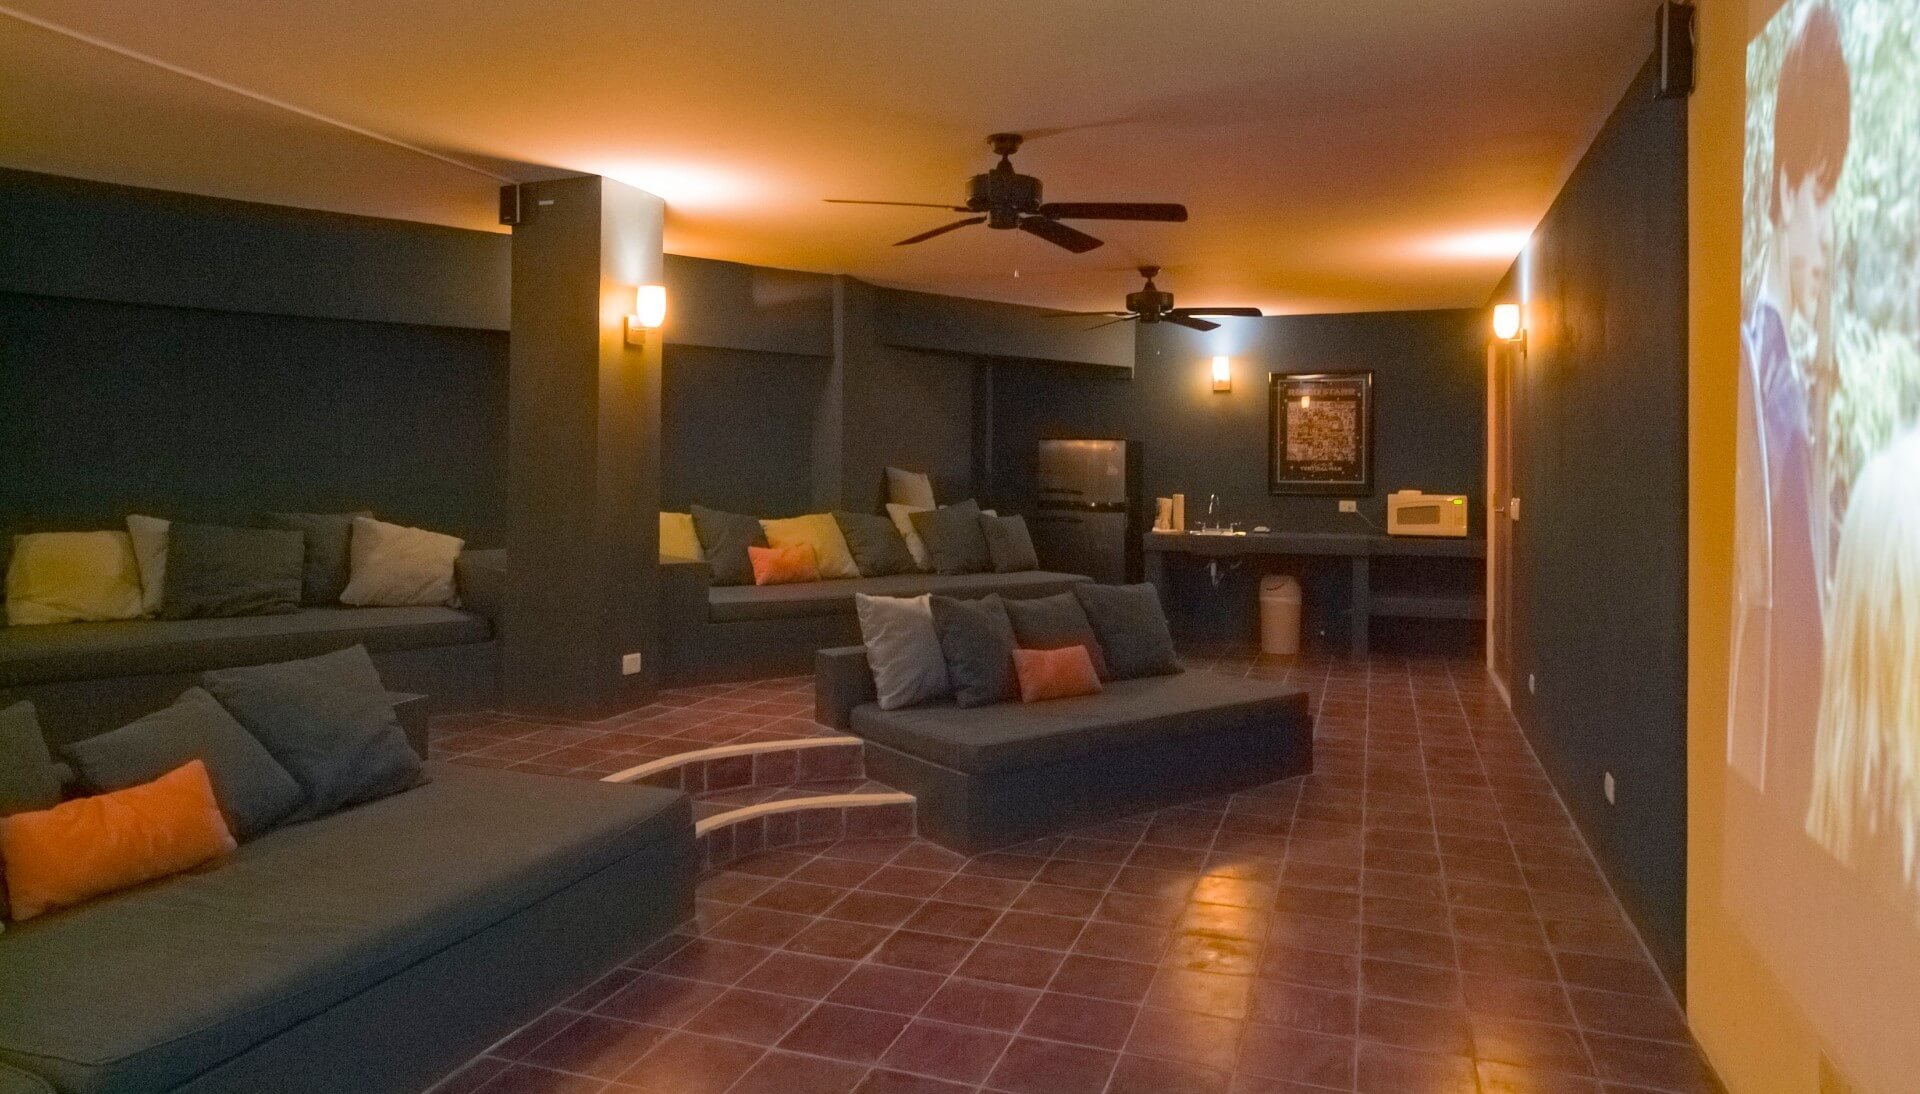 Theater room on the lower level